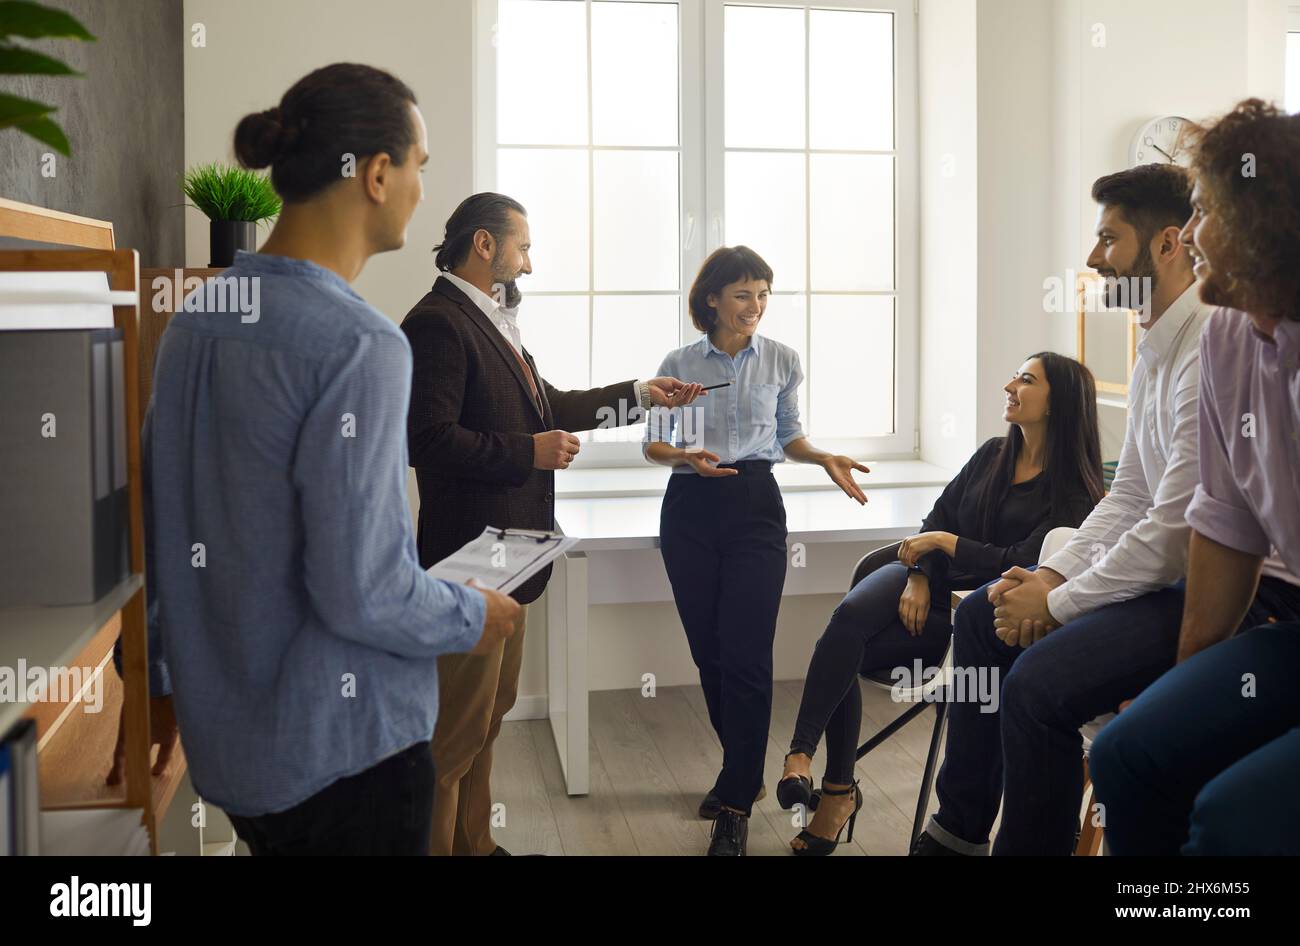 Employees communicate with each other by telling stories and discussing their work during the break. Stock Photo